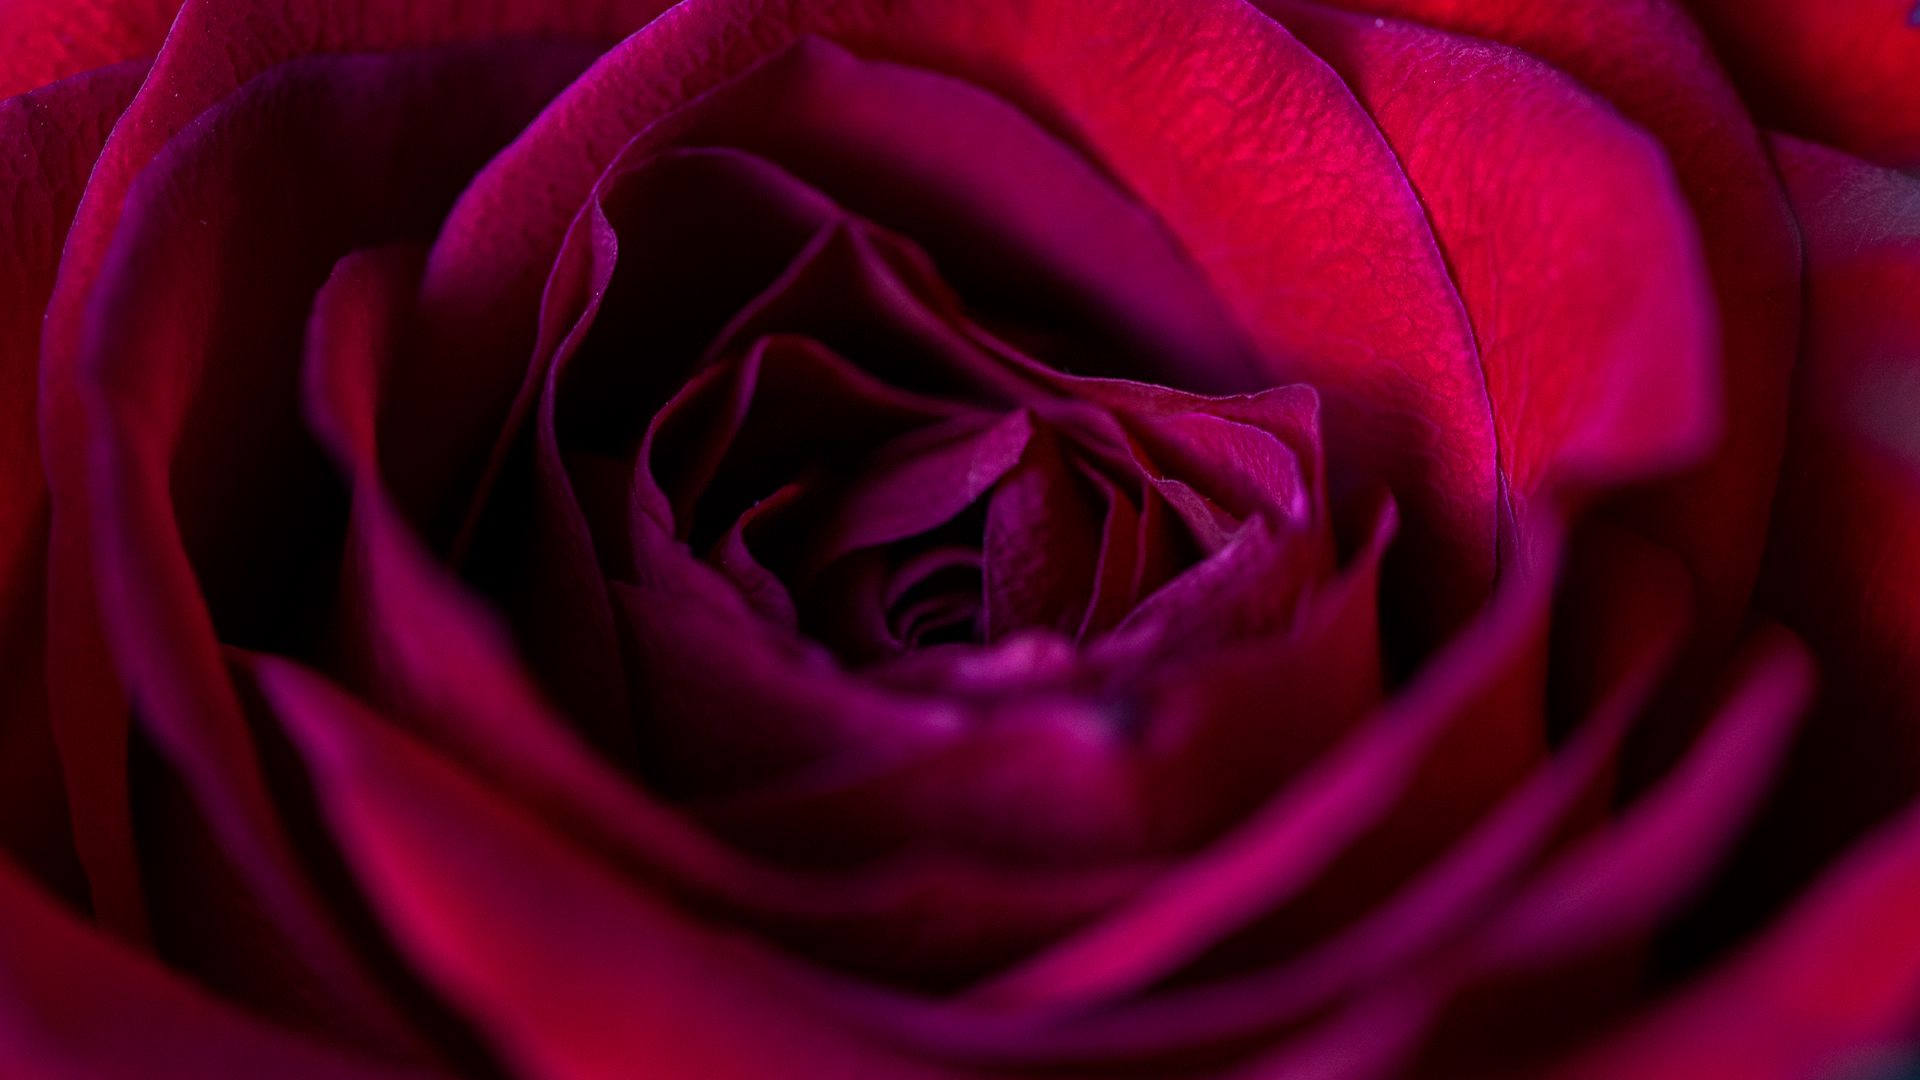 Download wallpaper 1920x1080 rose, flower, petals, red, upclose full hd,  hdtv, fhd, 1080p hd background